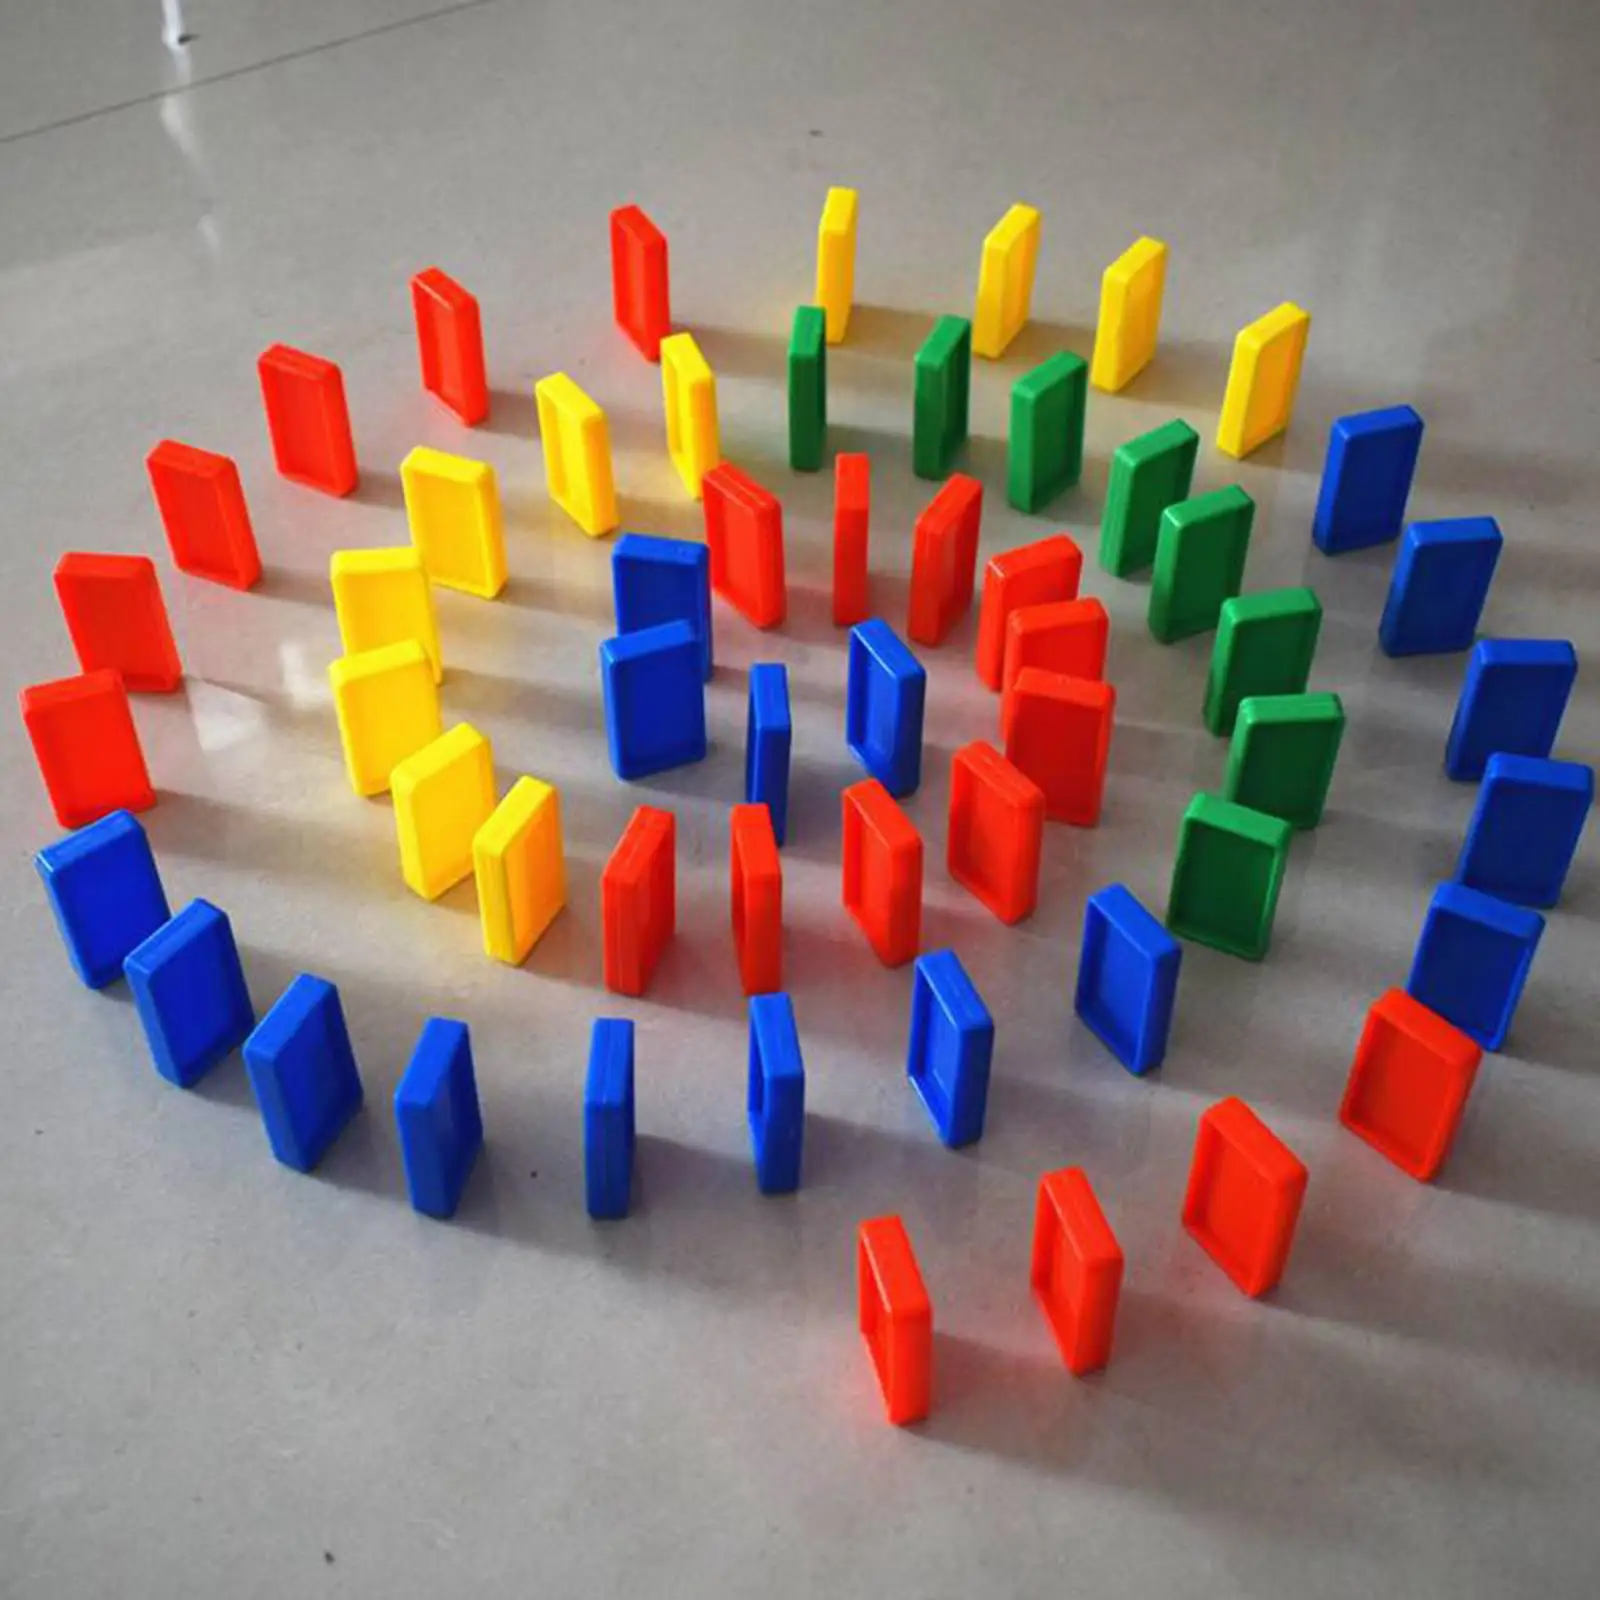 100 Pieces Colorful Dominoes Blocks Educational Play Toy Stacking Toy Building for Girls Boys Toddler Children Creative Gifts